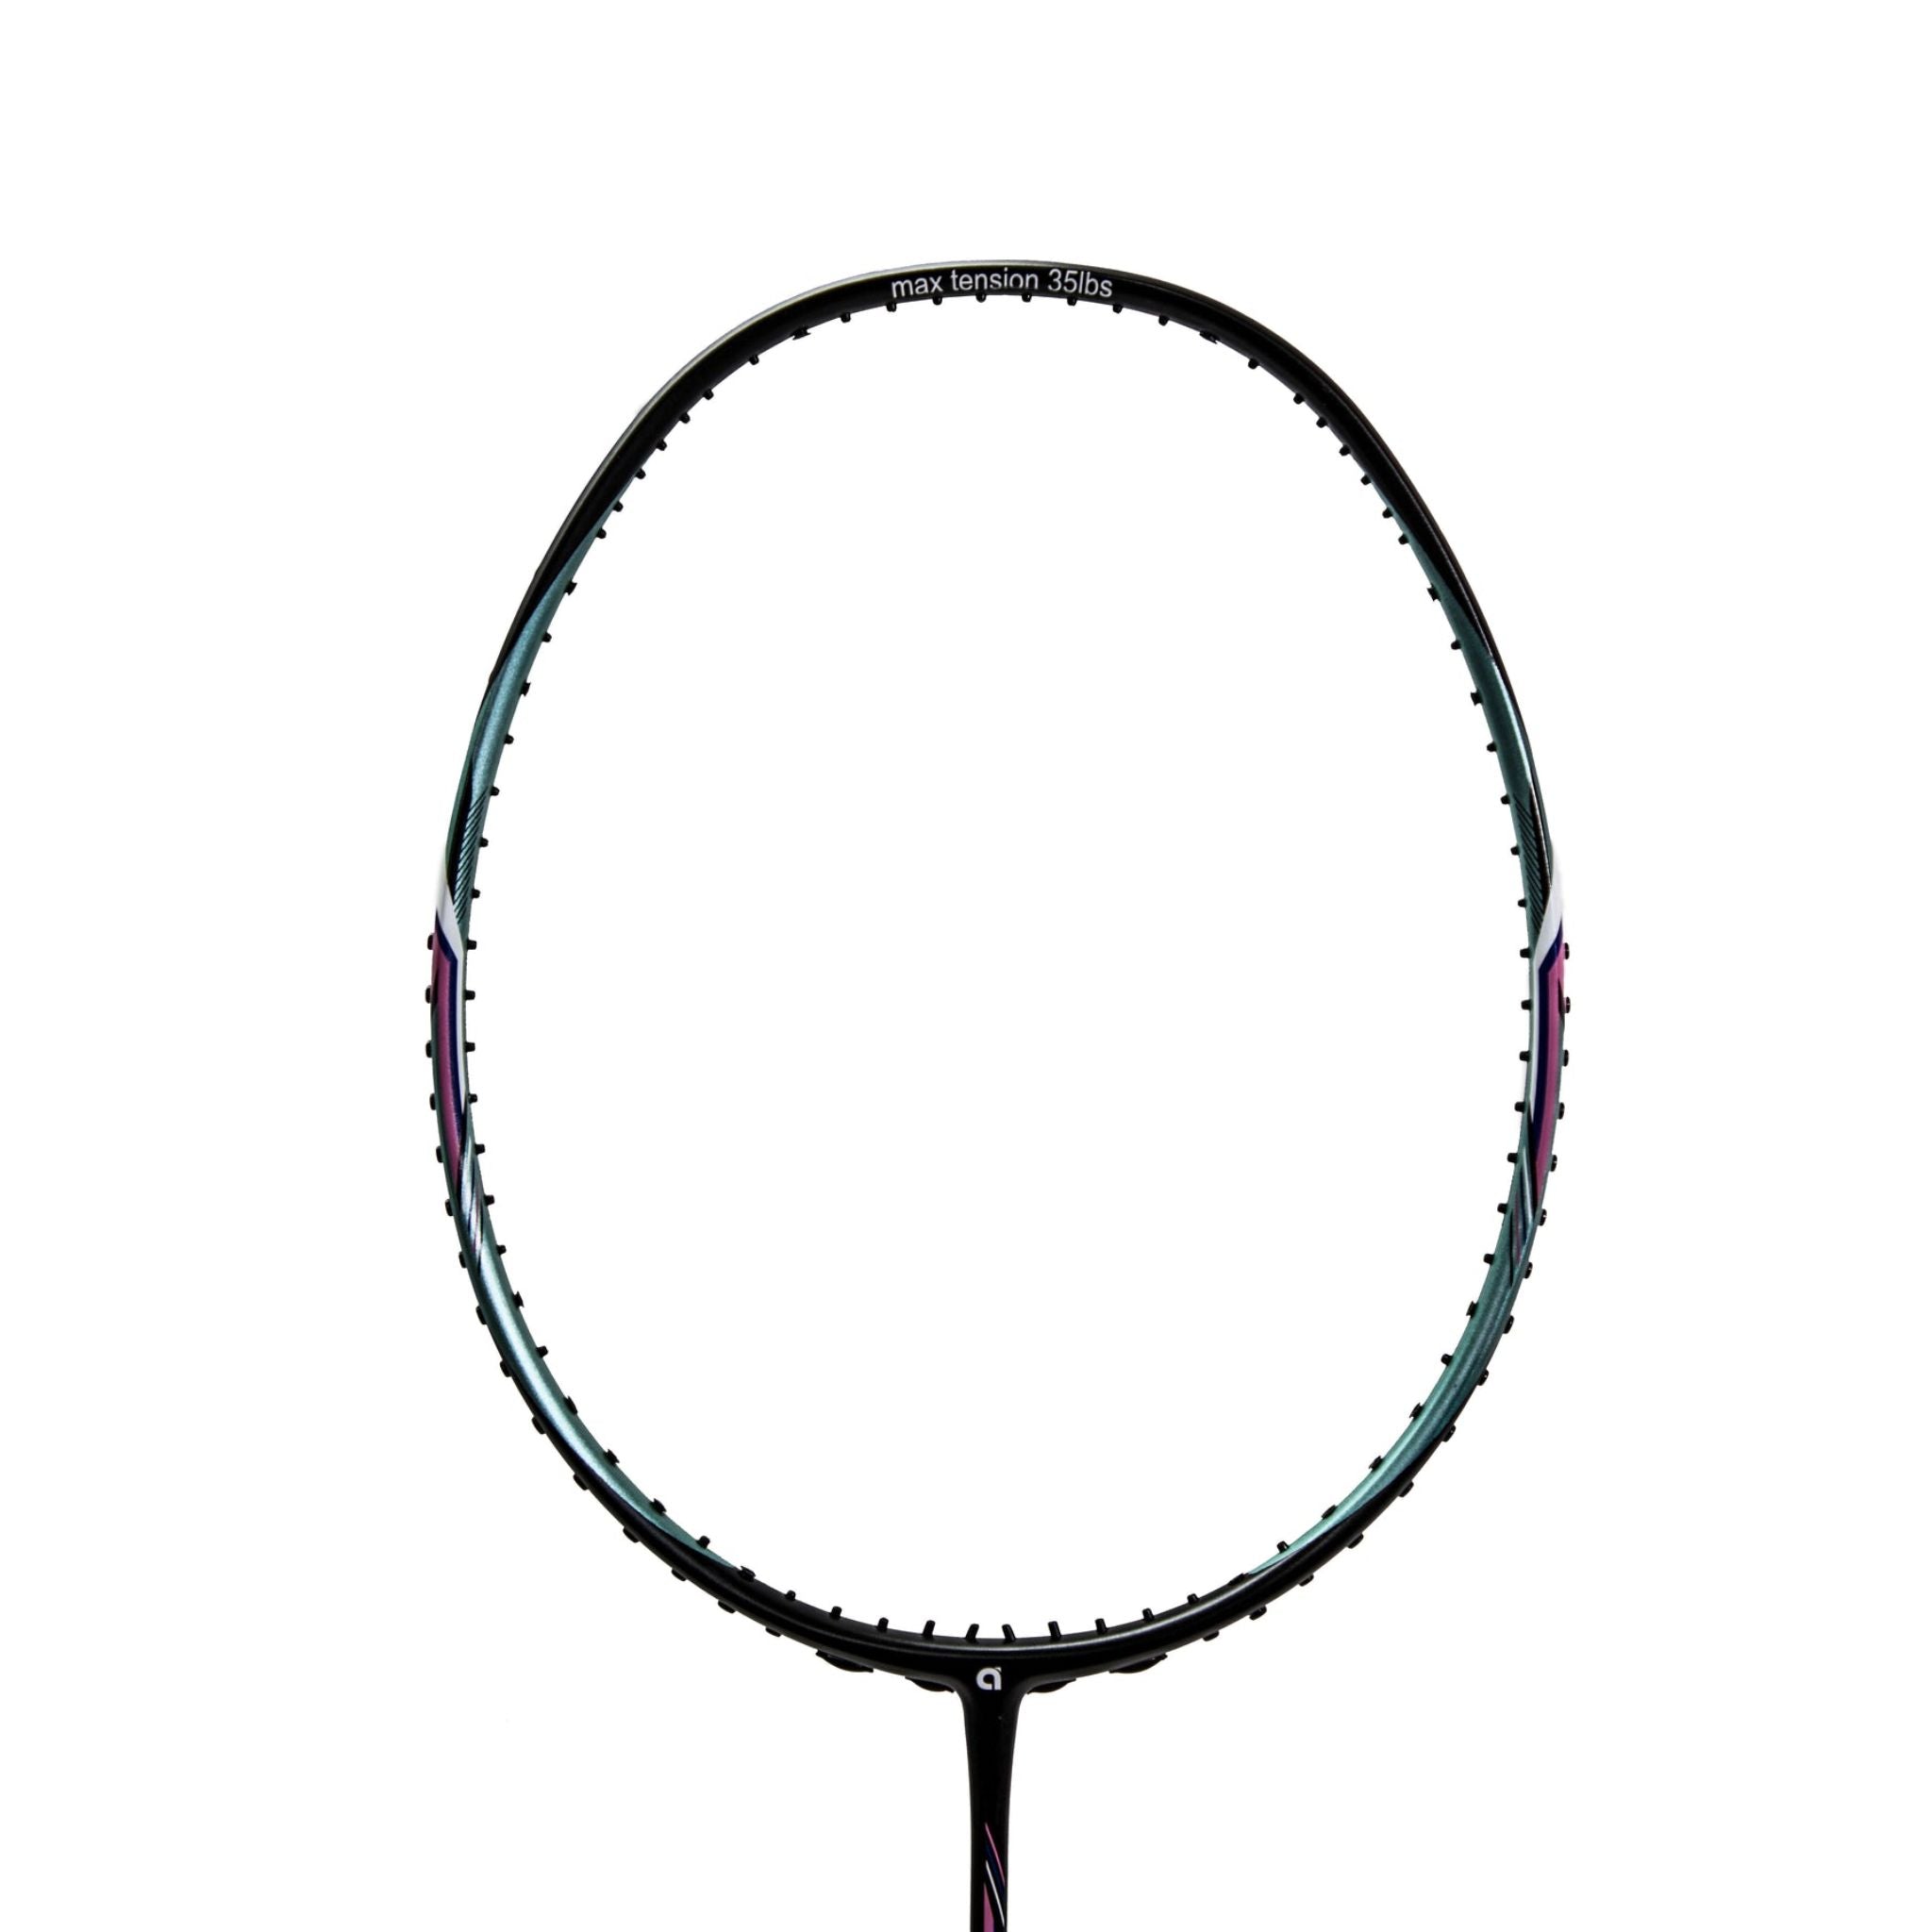 APACS Badminton - Unrivaled Accuracy and Superior Performance